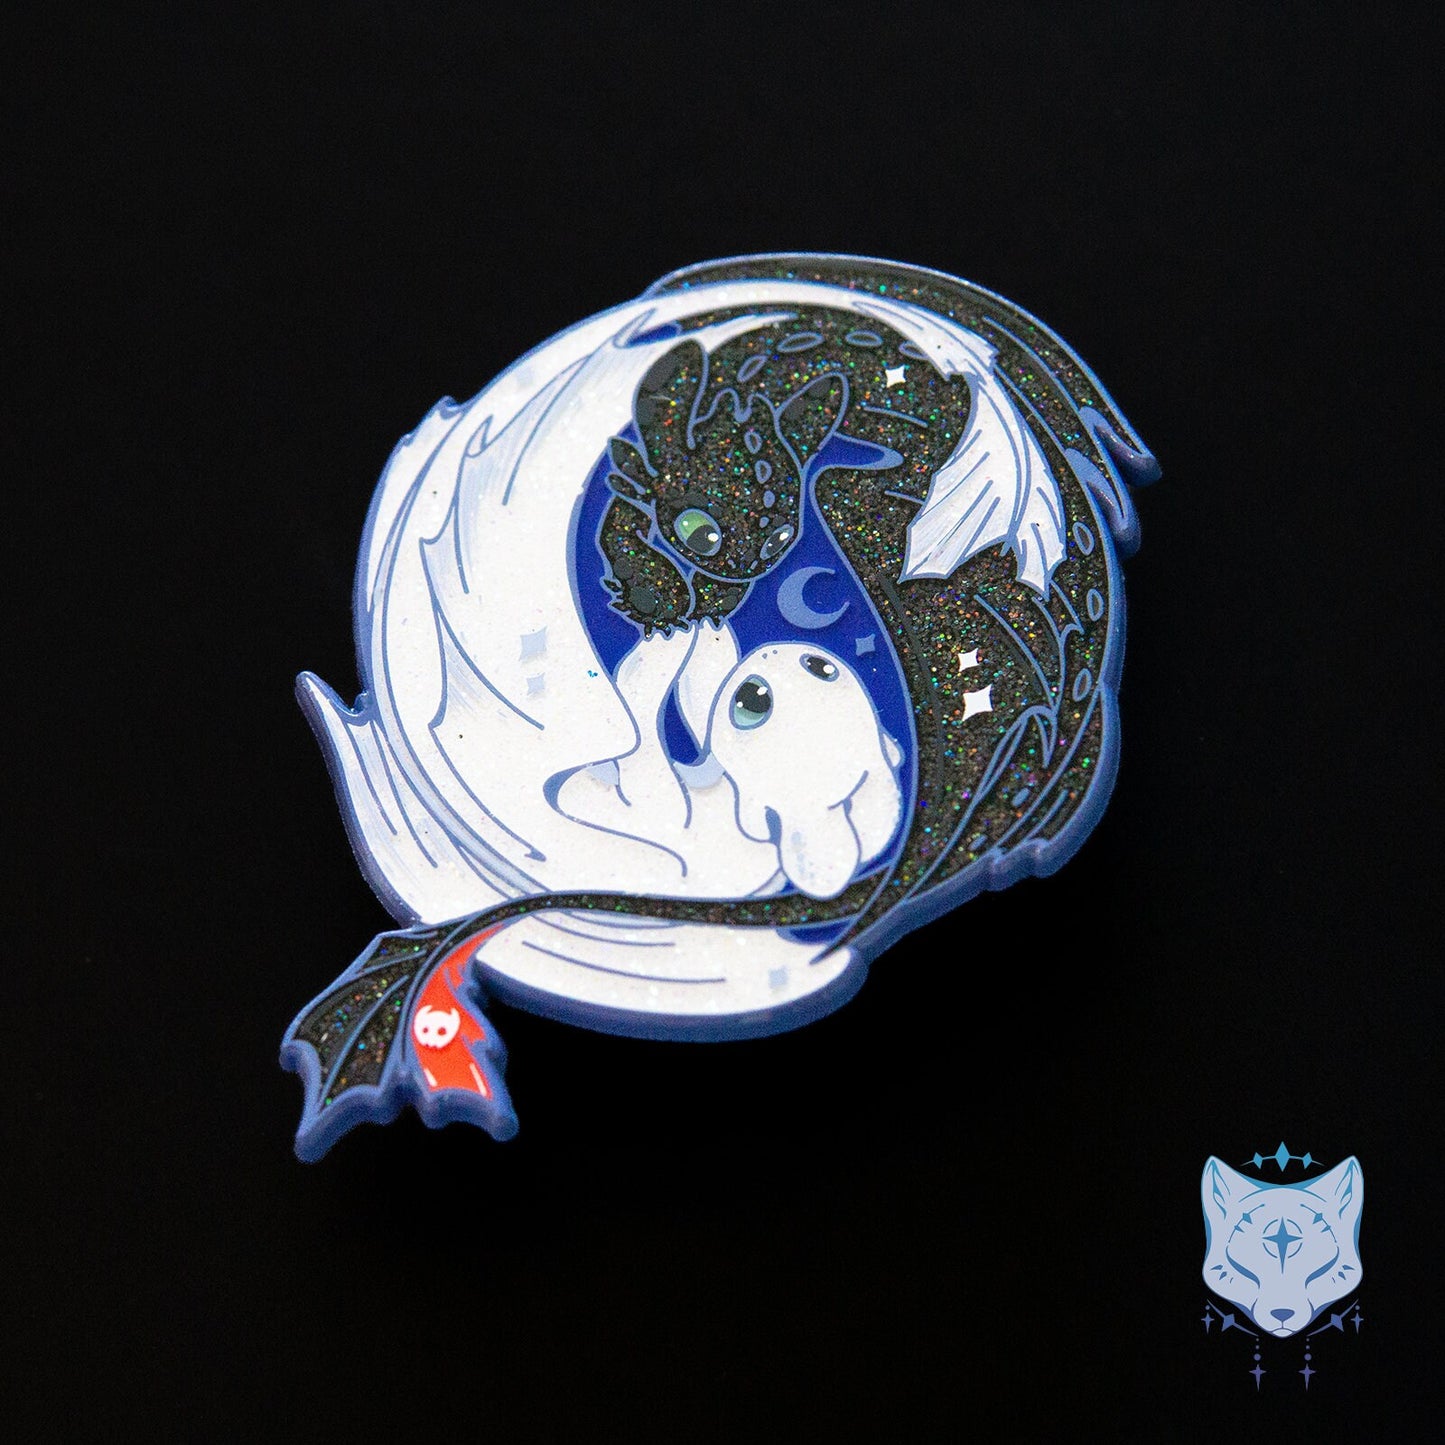 HTTYD "Flight of Dragons" - LE 110 Dyed Metal 2.5" pin